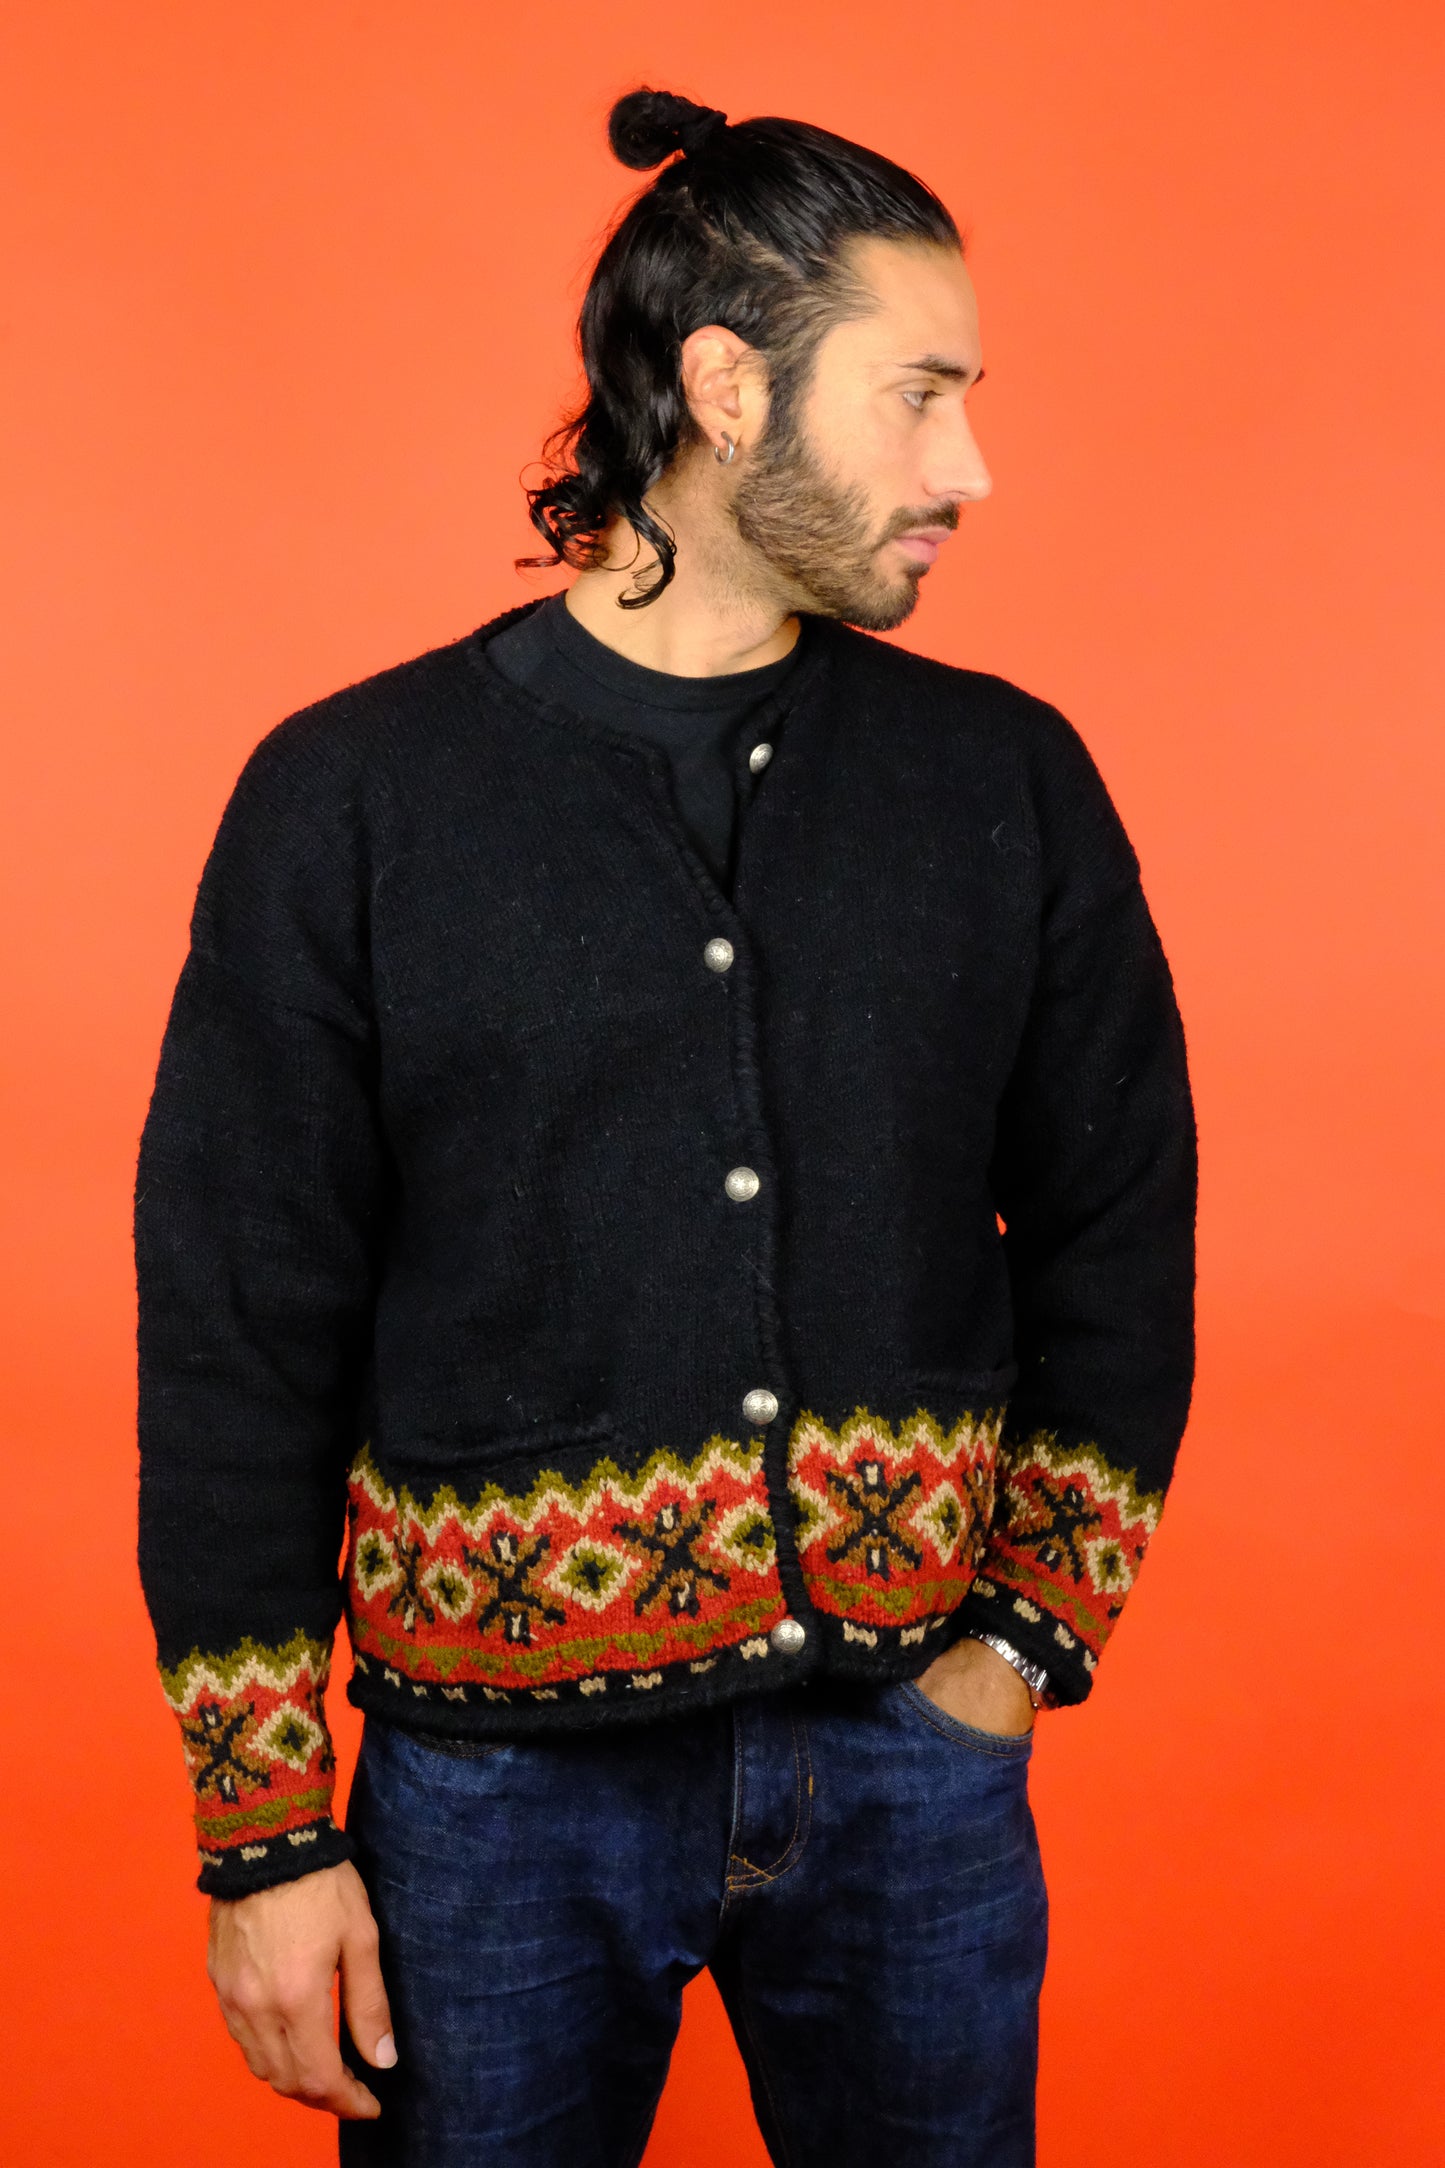 Planet Earth Imports Hand Knitted Cardigan 'M' - vintage clothing clochard92.com